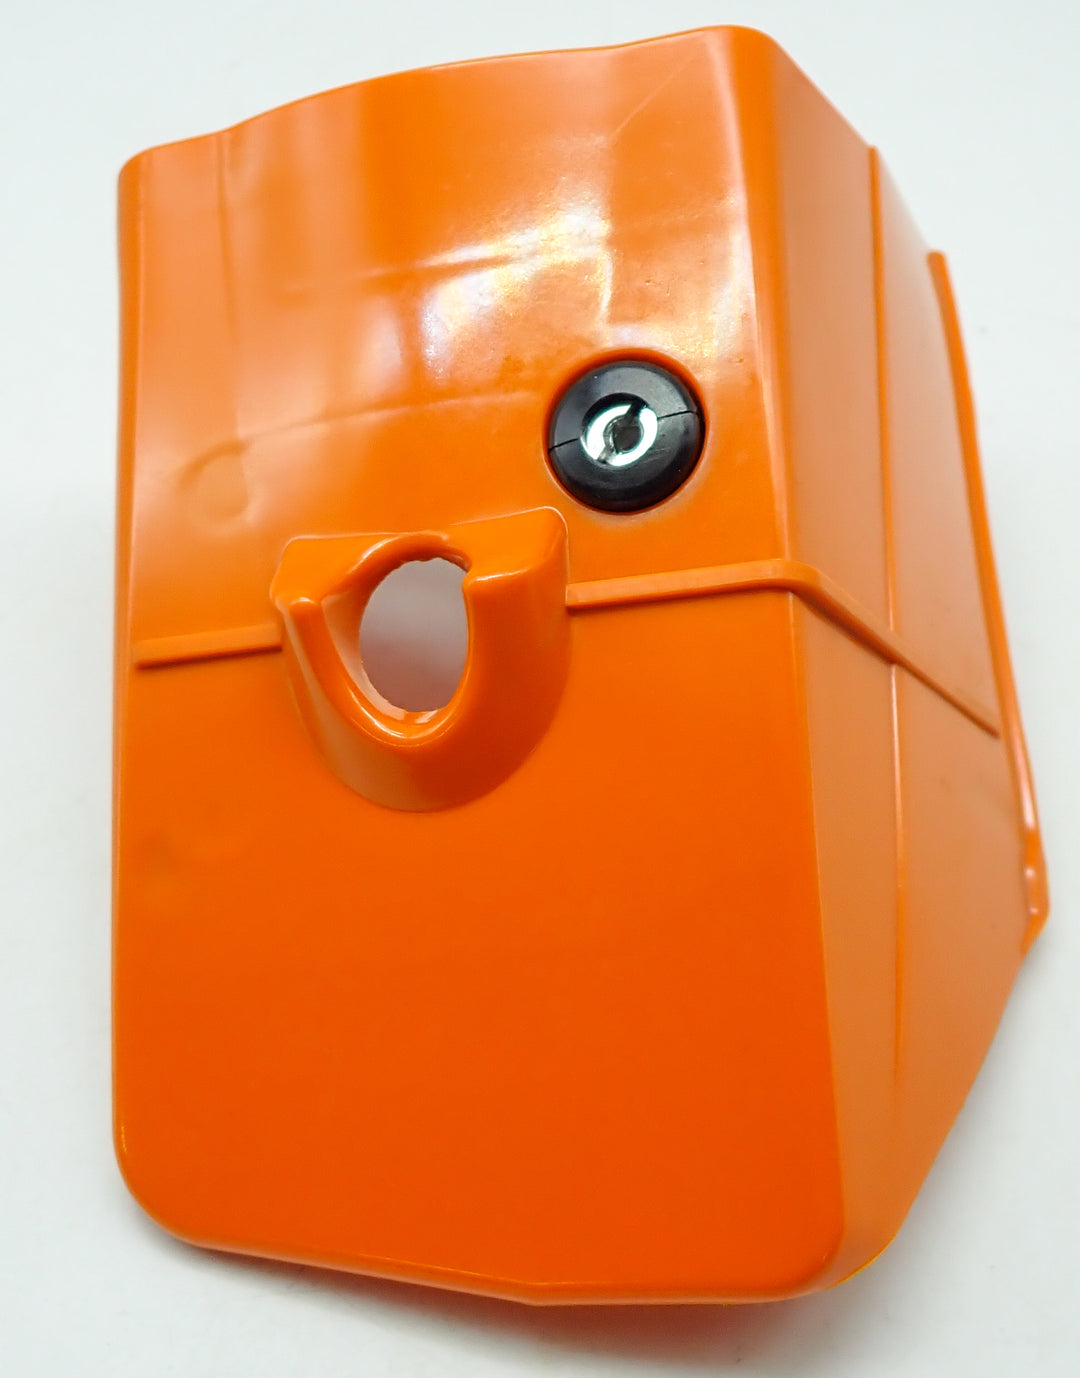 THE DUKE'S CYLINDER TOP COVER FITS STIHL MS341 MS361